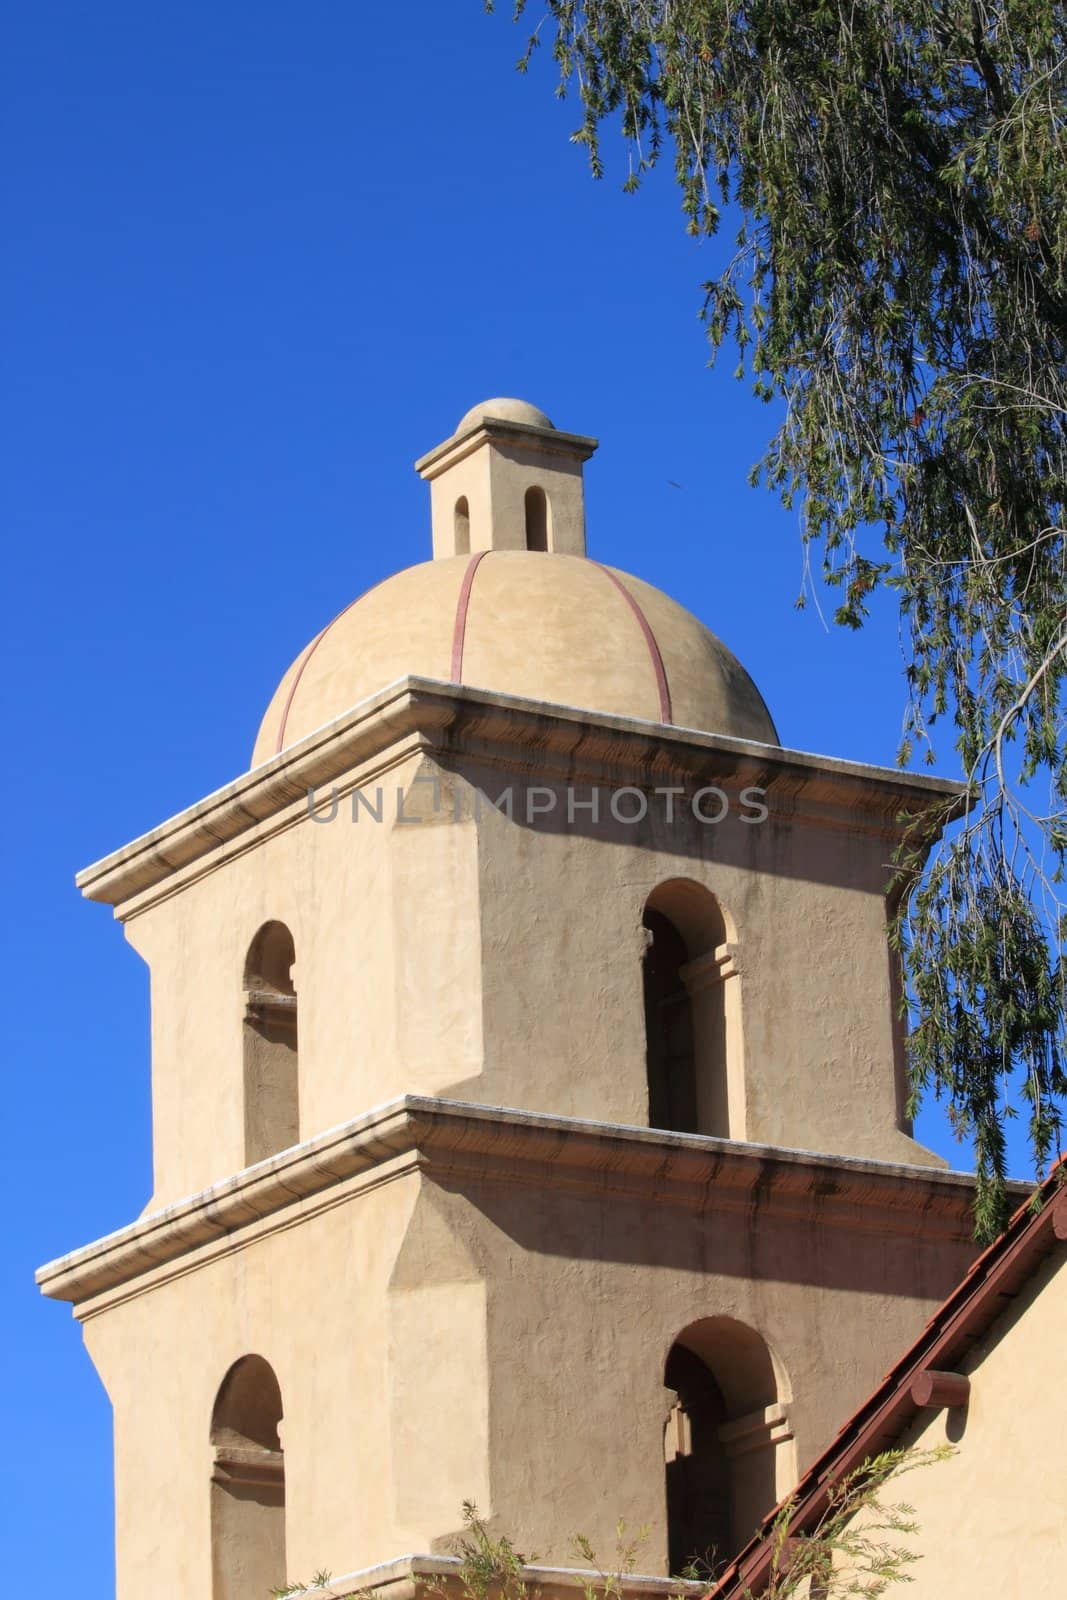 Bell Tower with blue sky in the background